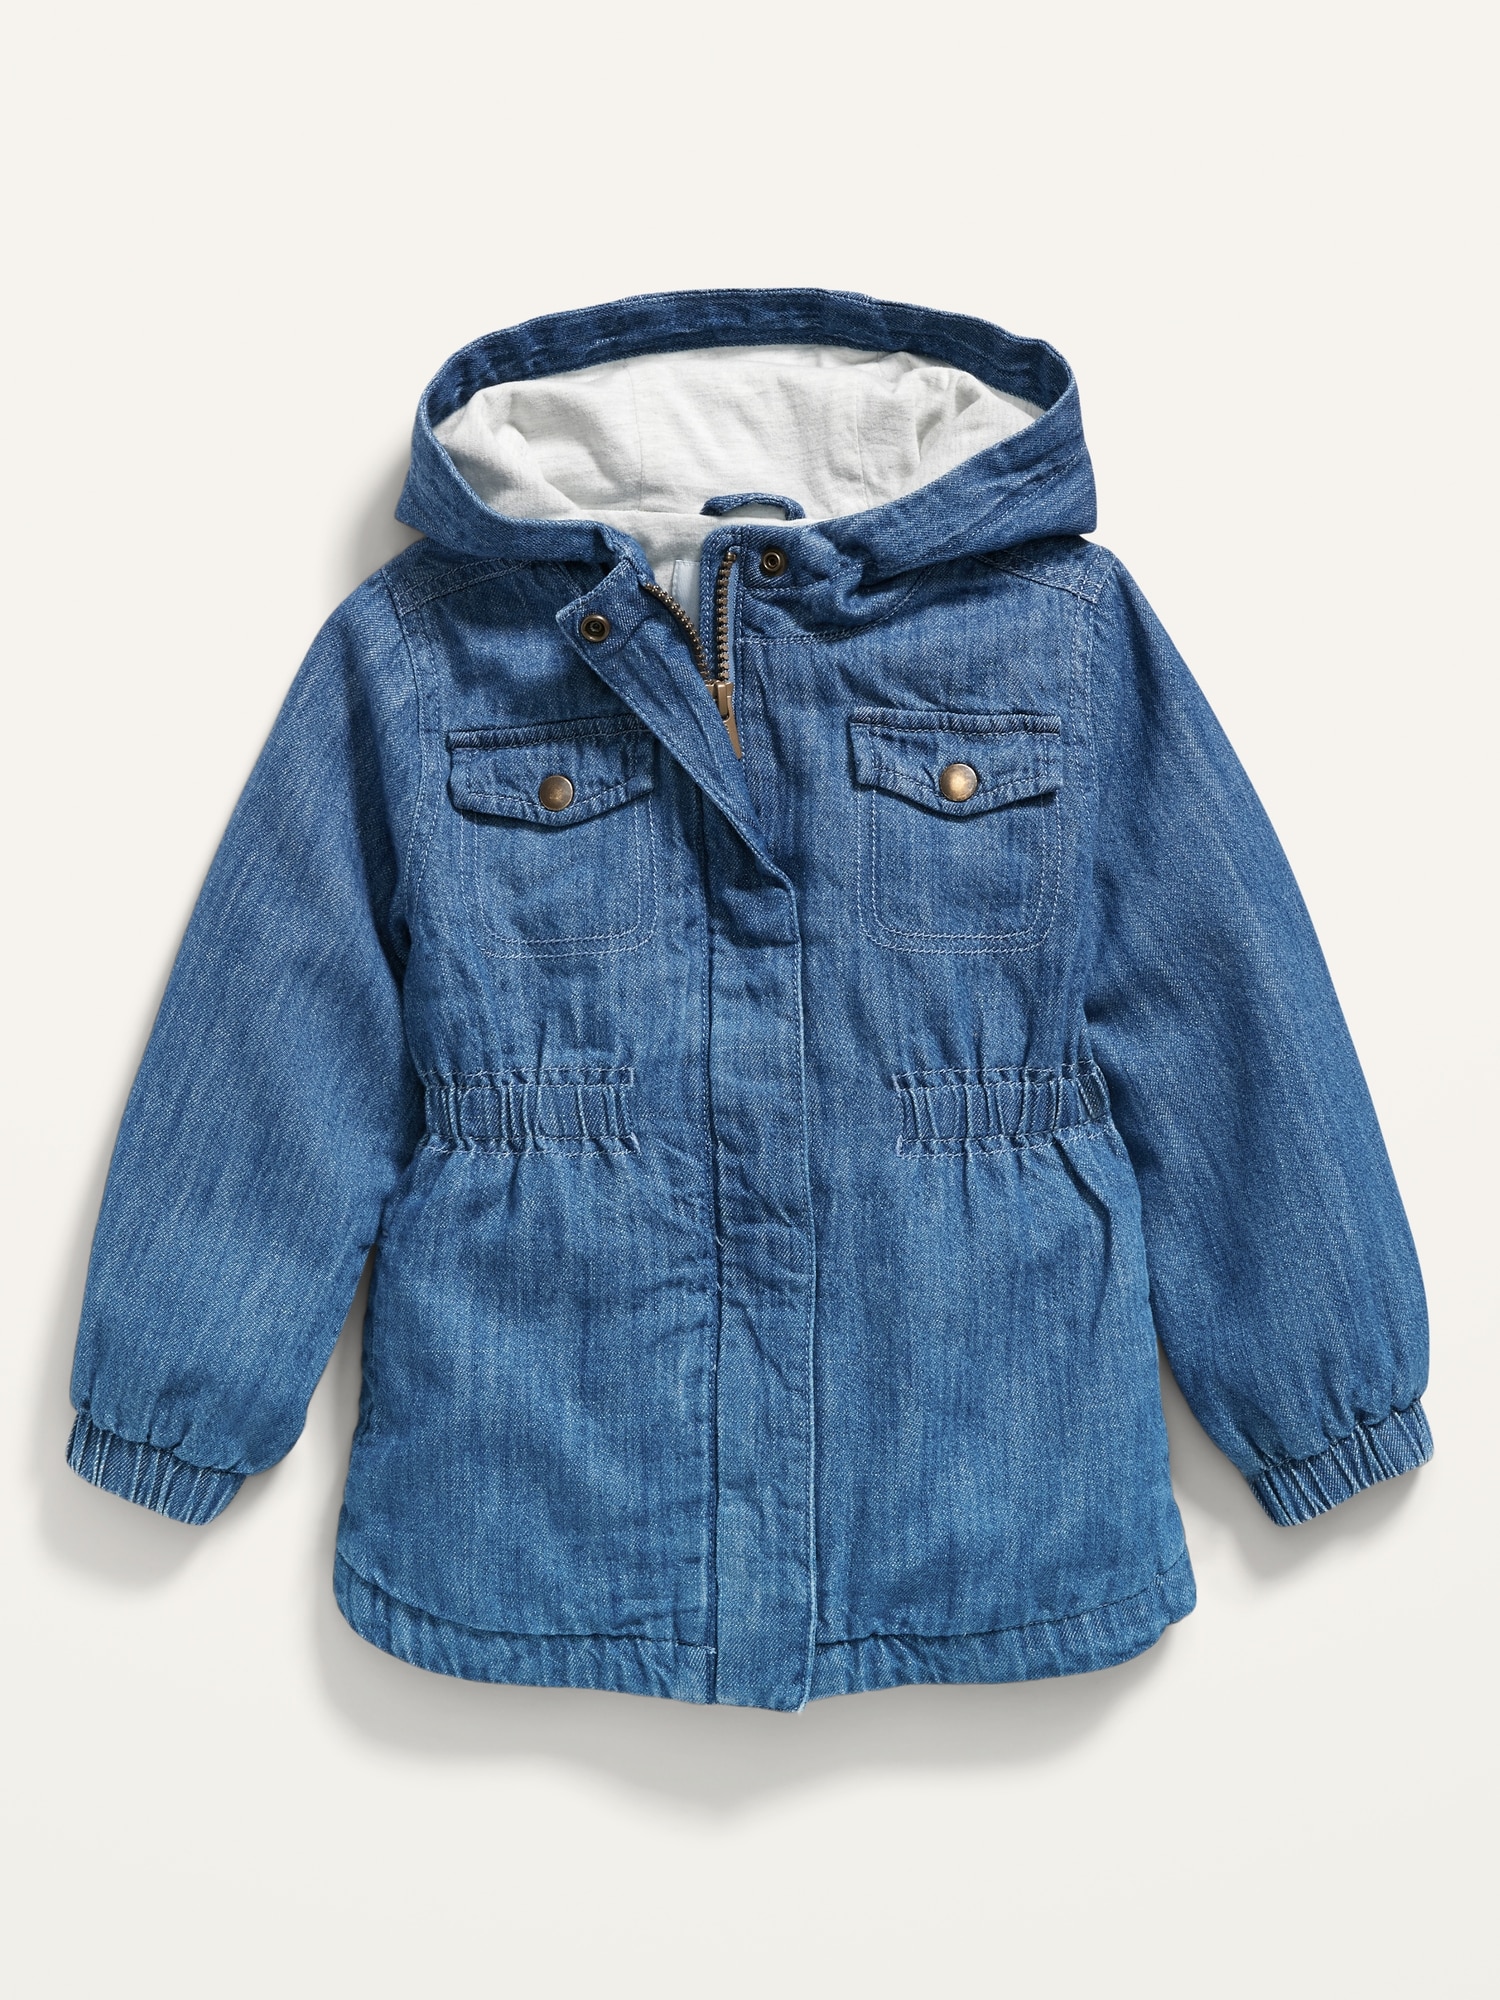 Hooded Twill Utility Scout Jacket for Toddler Girls | Old Navy